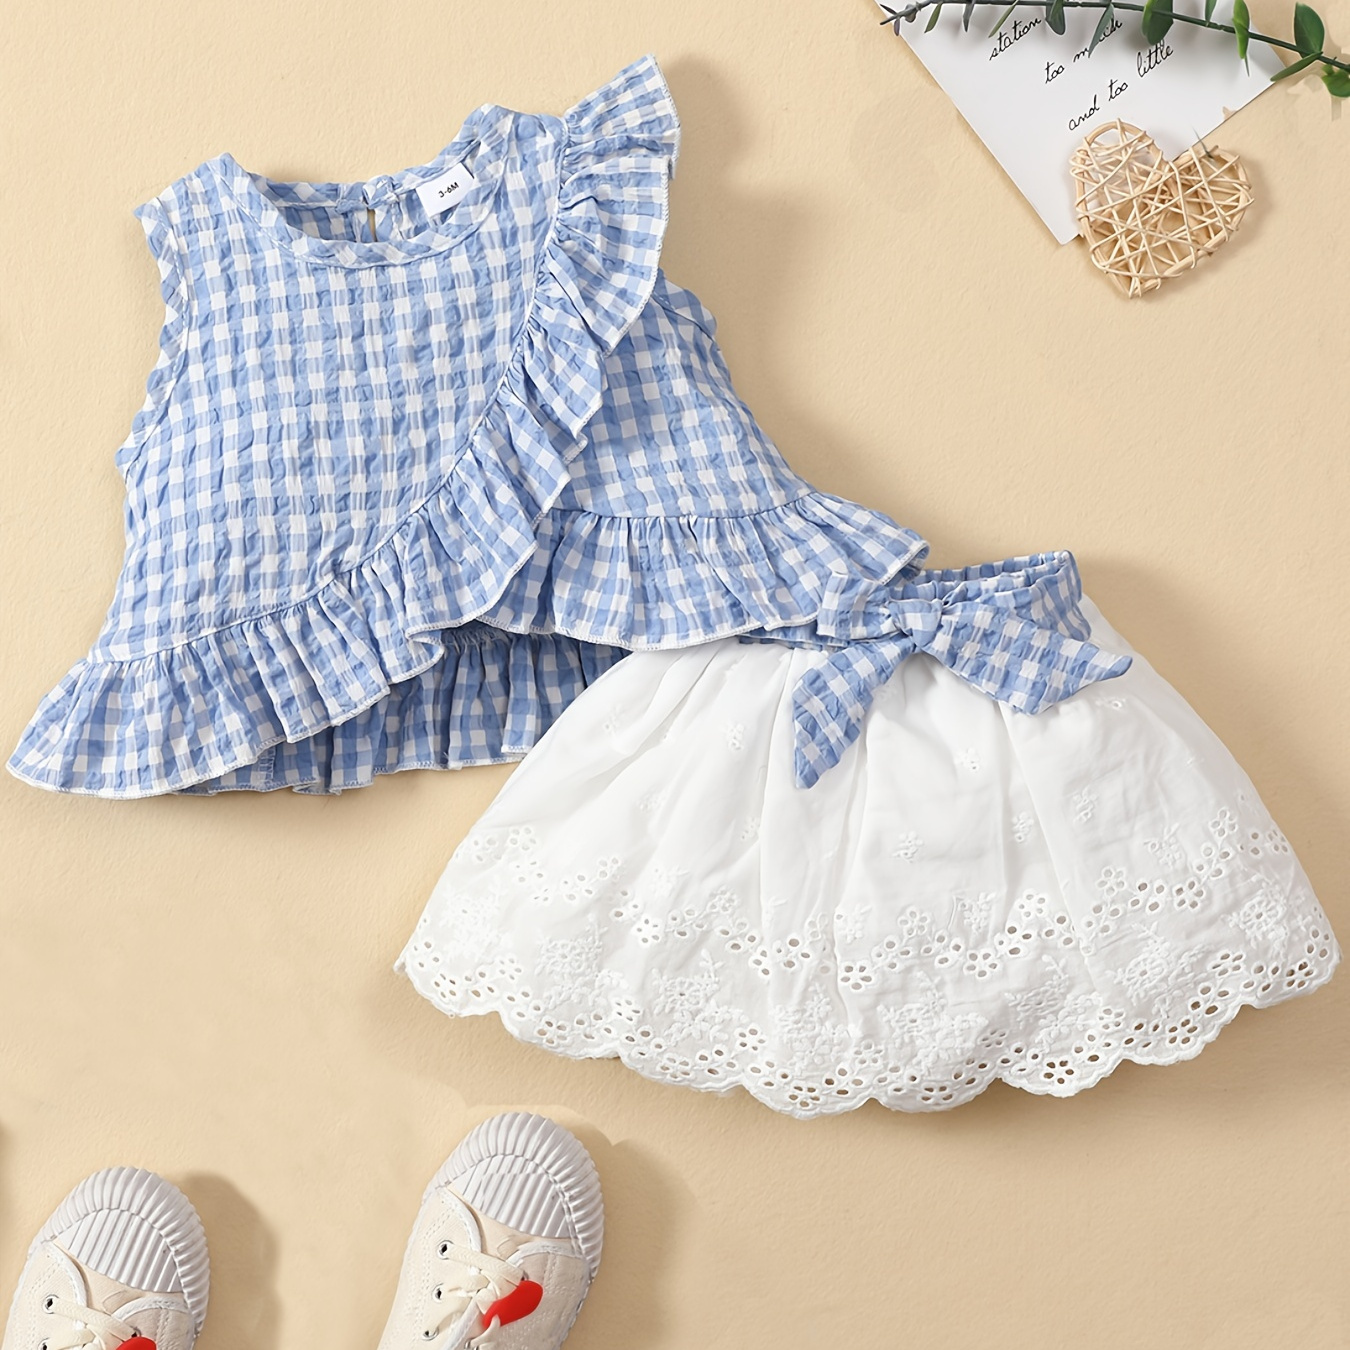 

Baby Girls Casual Cute Plaid Print Top & Lace Hem Skirt Set For Summer Holiday, Coquette Style